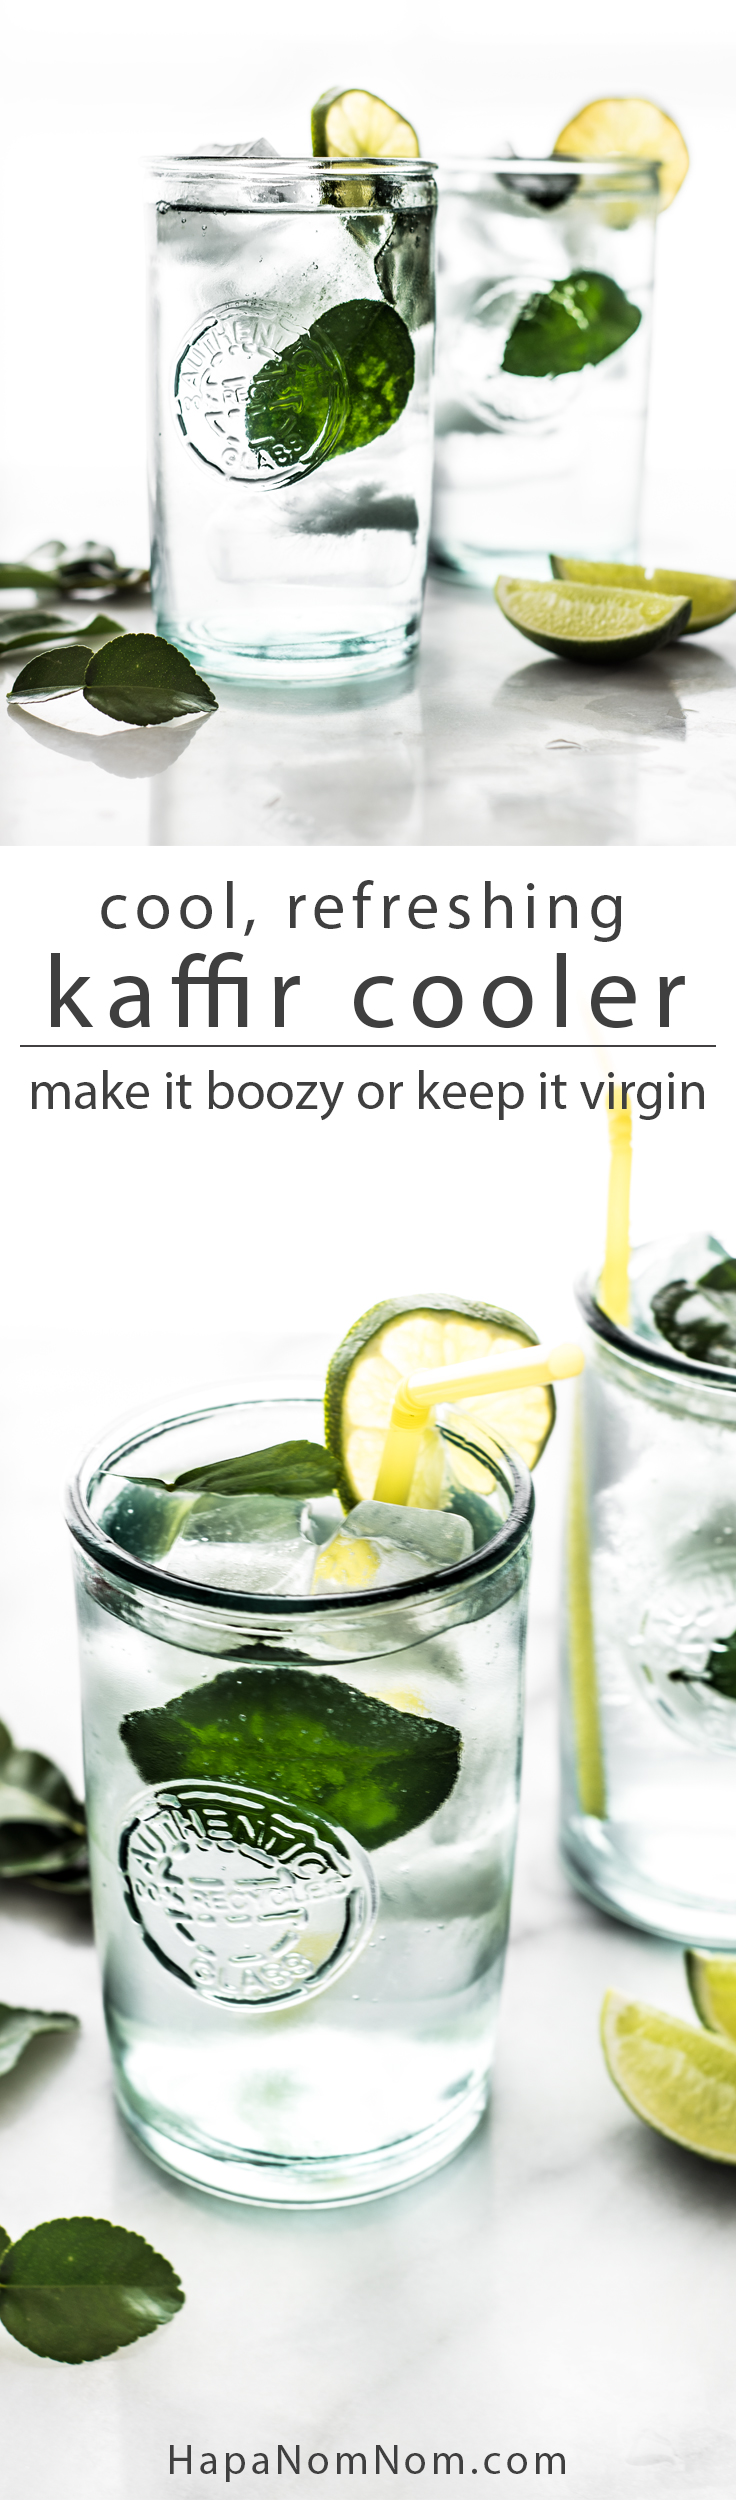 Cool and refreshing, Kaffir Cooler. Make it boozy - think mojito meets Southeast Asia. Or keep it virgin for a perfectly thirst-quenching drink. 